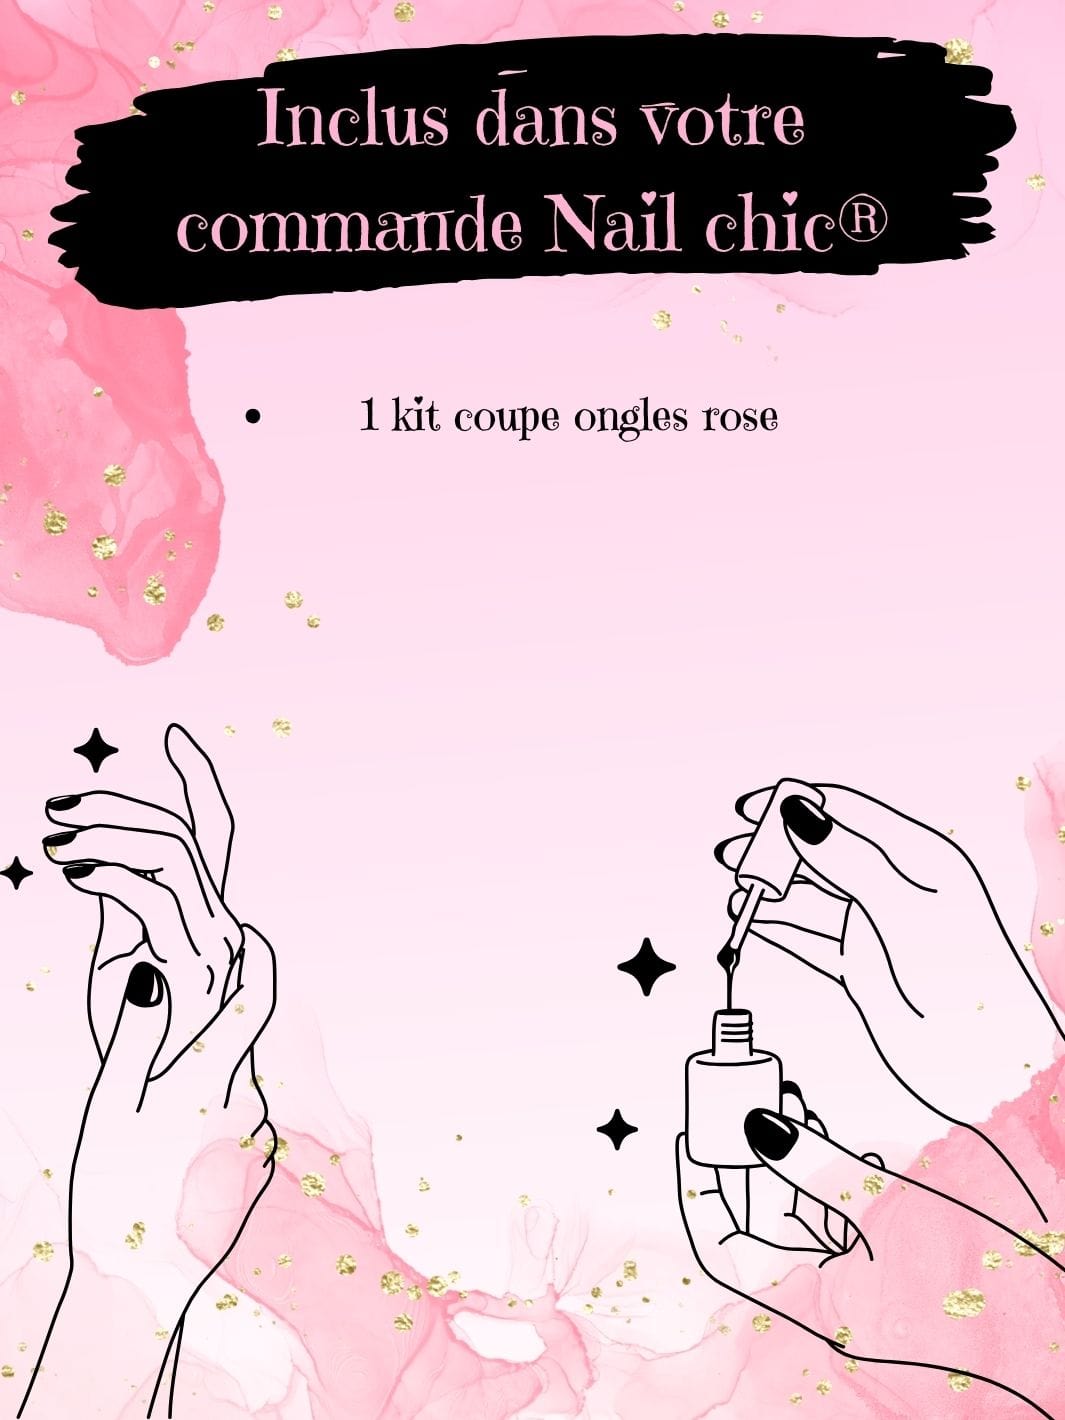 Meilleur coupe ongle Nail Chic